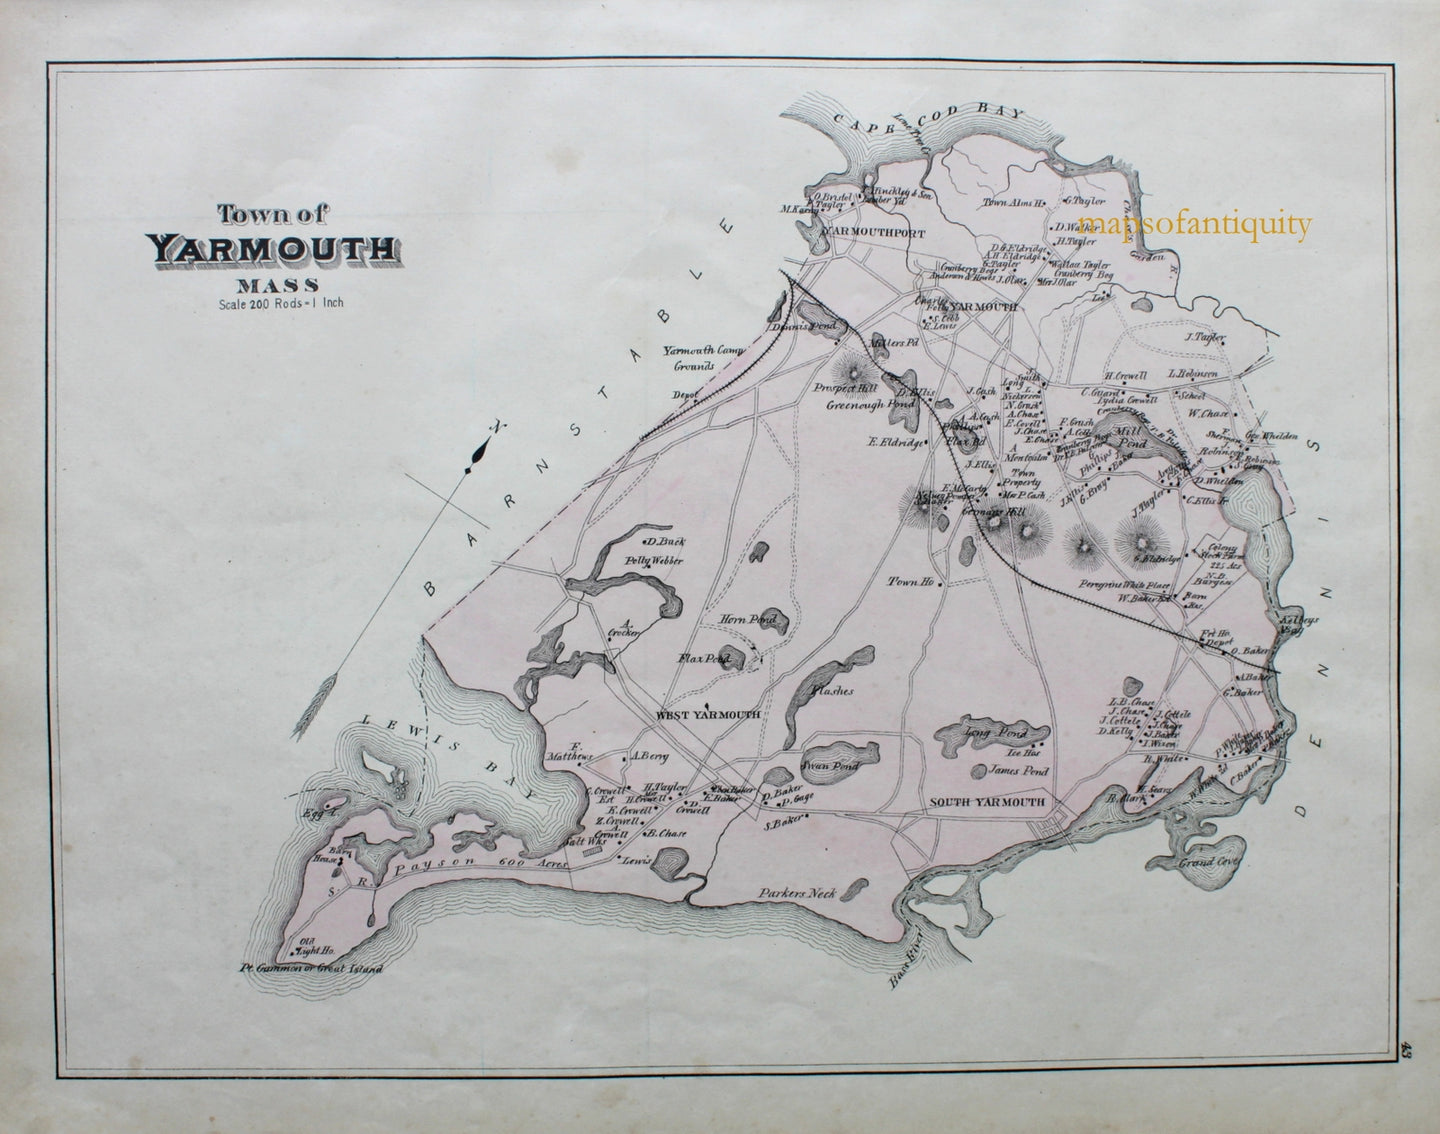 Reproduction-Town-of-Yarmouth-p.-43-Town-and-Village-Maps-Atlas-of-Barnstable-County-Walker-1880.---Reproduction---Reproductions-Cape-Cod-and-Islands-Reproduction--Maps-Of-Antiquity